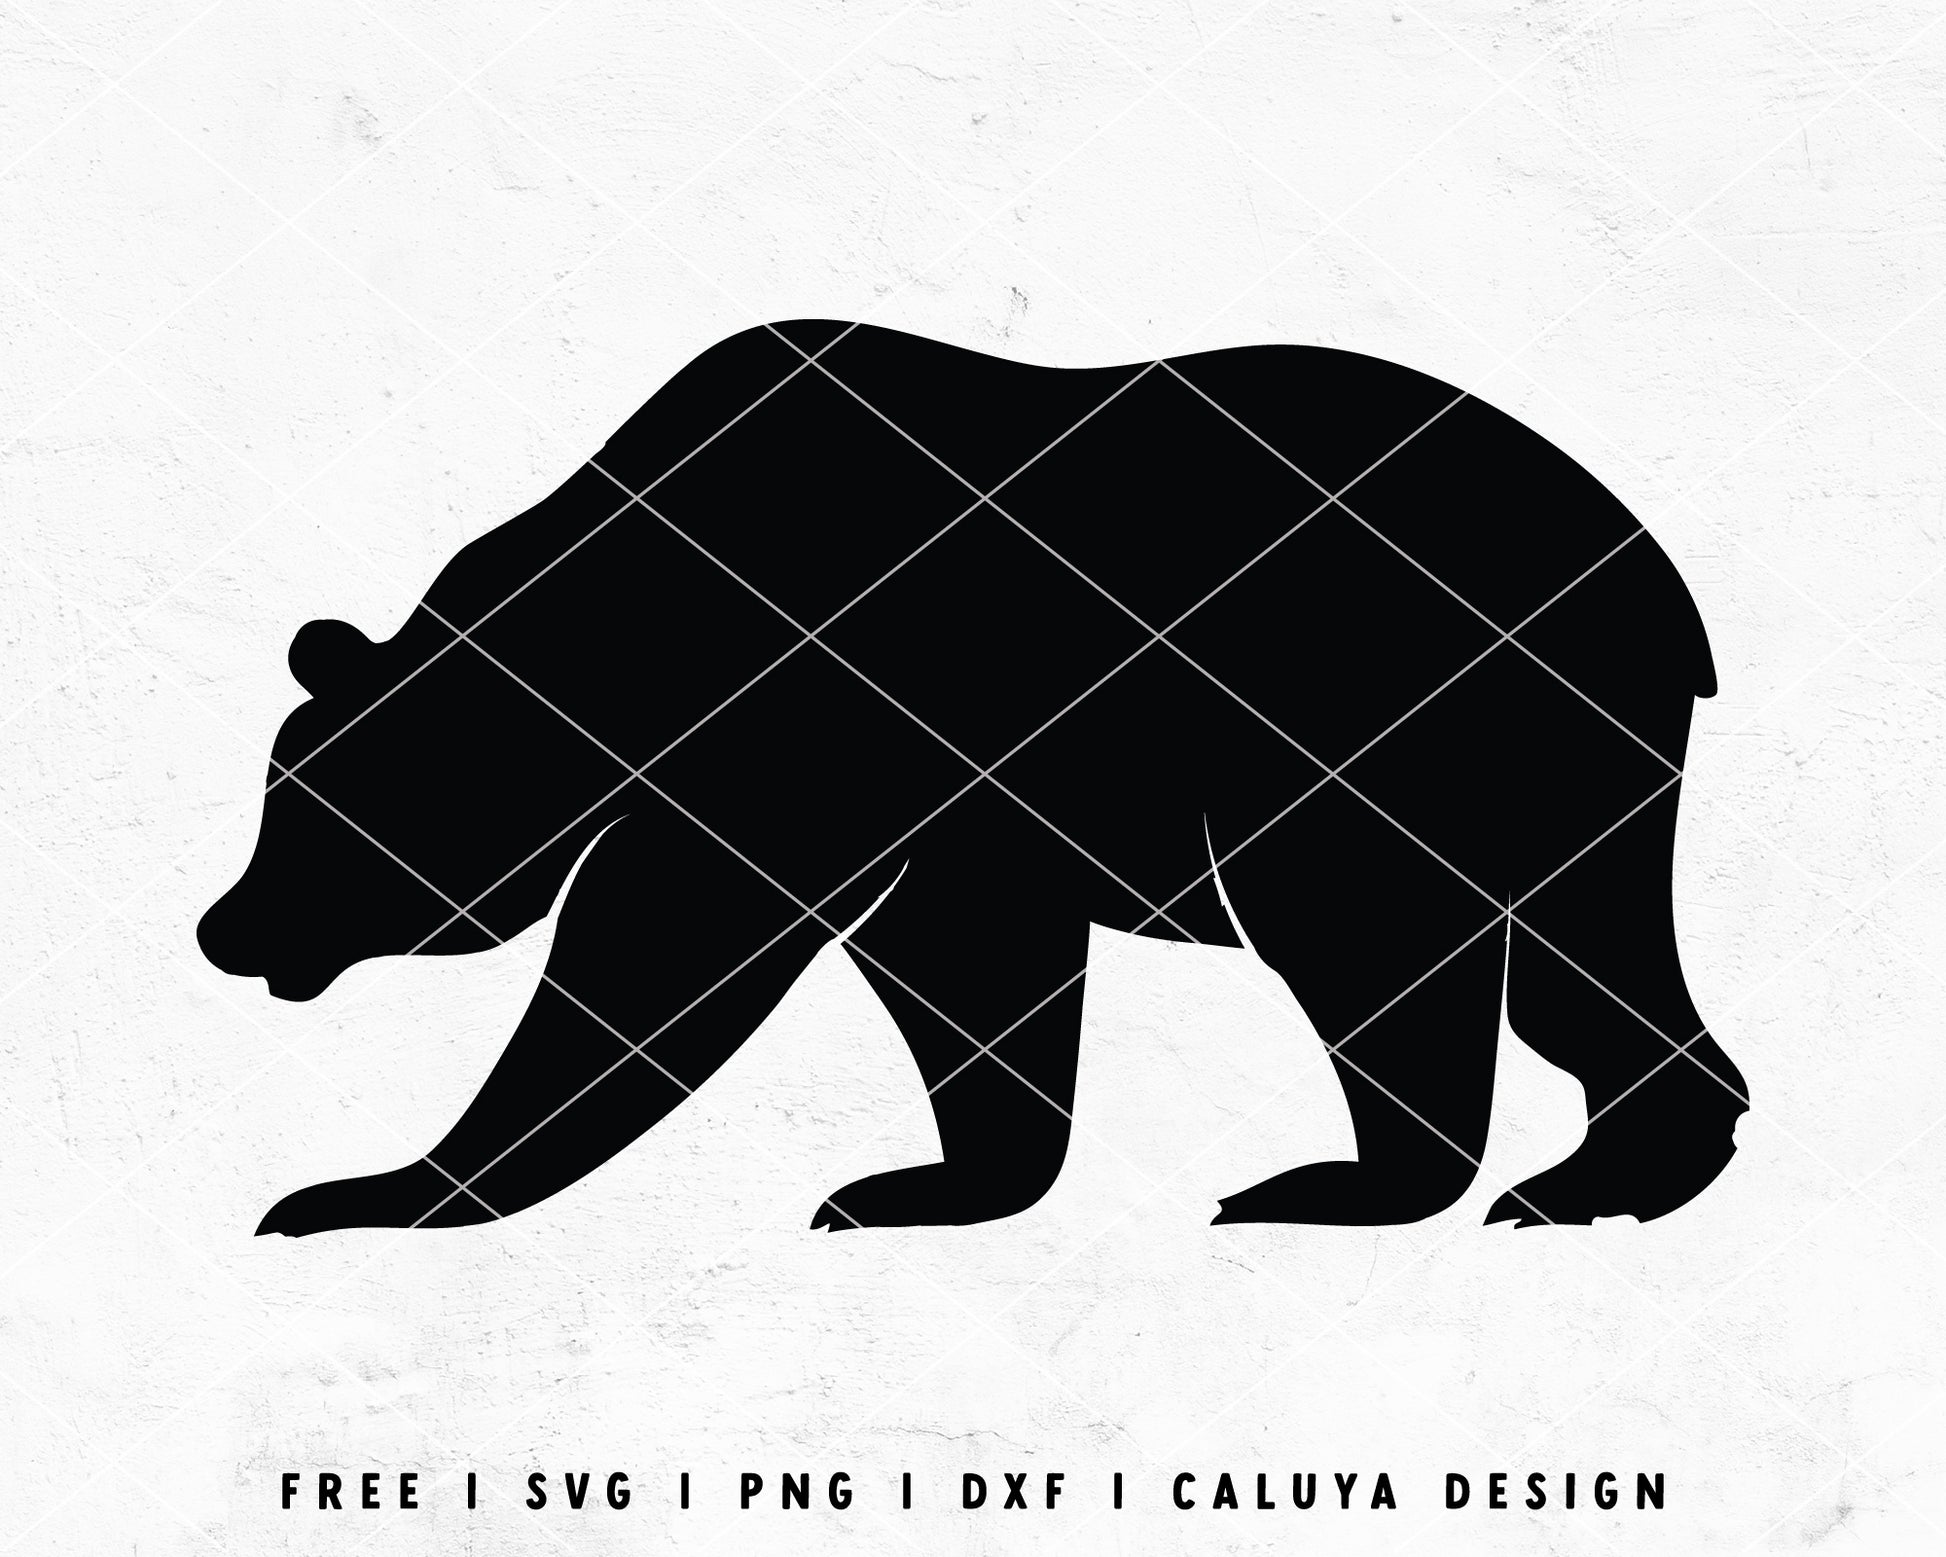 FREE Bear SVG | Forest Animal SVG  Cut File for Cricut, Cameo Silhouette | Free SVG Cut File